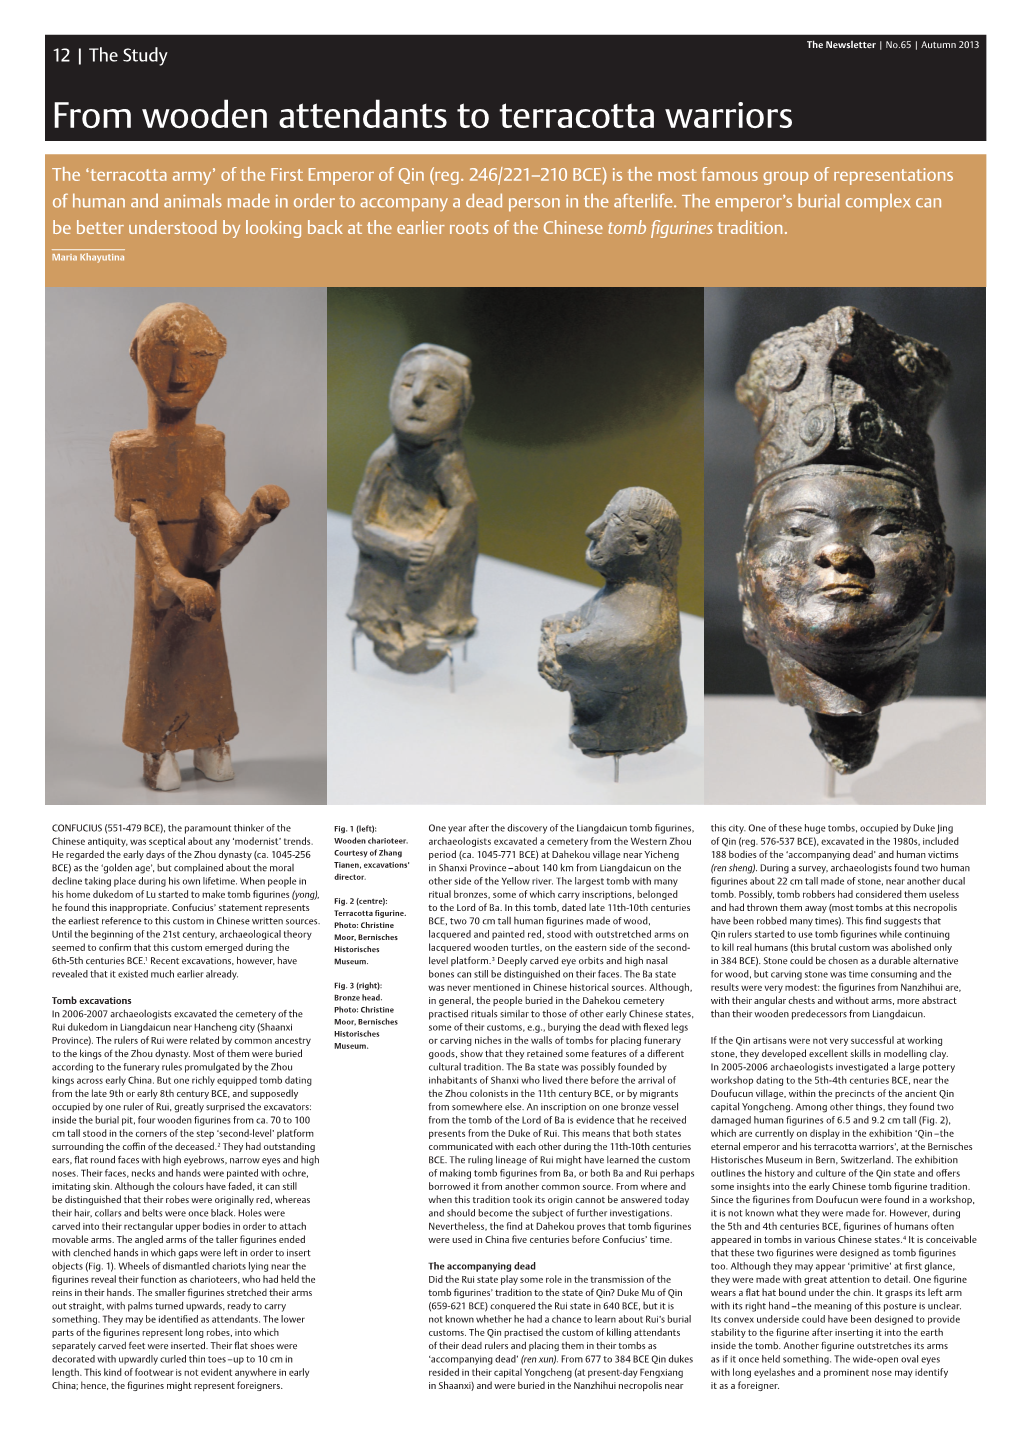 From Wooden Attendants to Terracotta Warriors